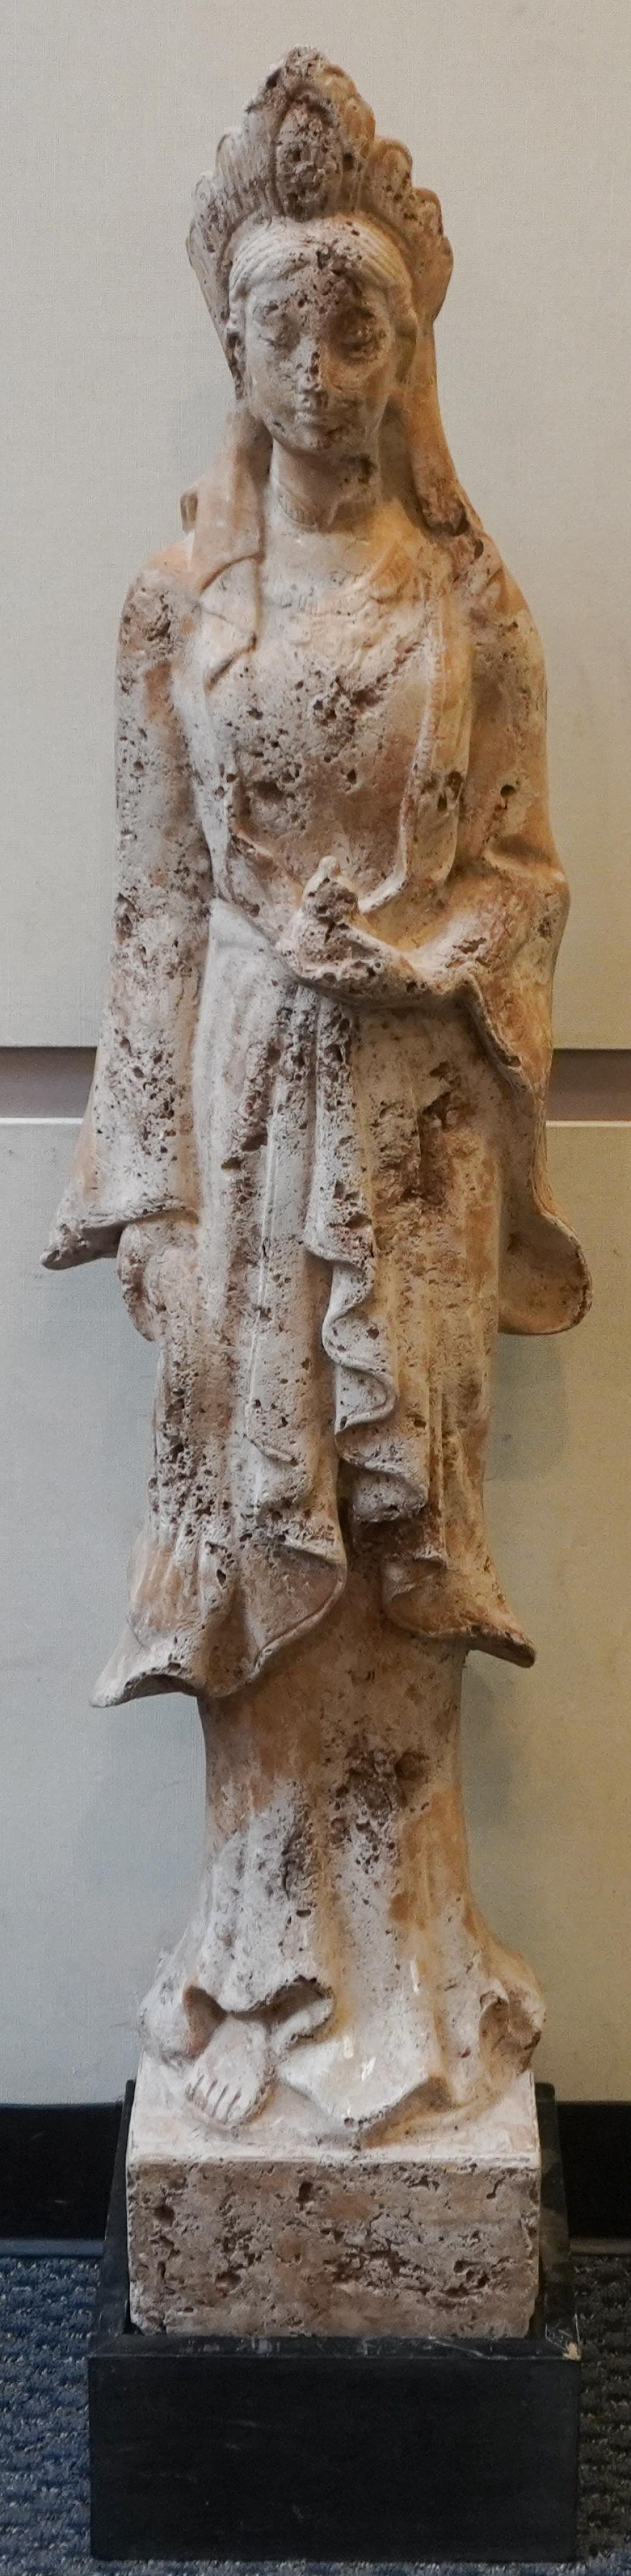 CHINESE PLASTER FIGURE OF GUANYIN 2e68c7